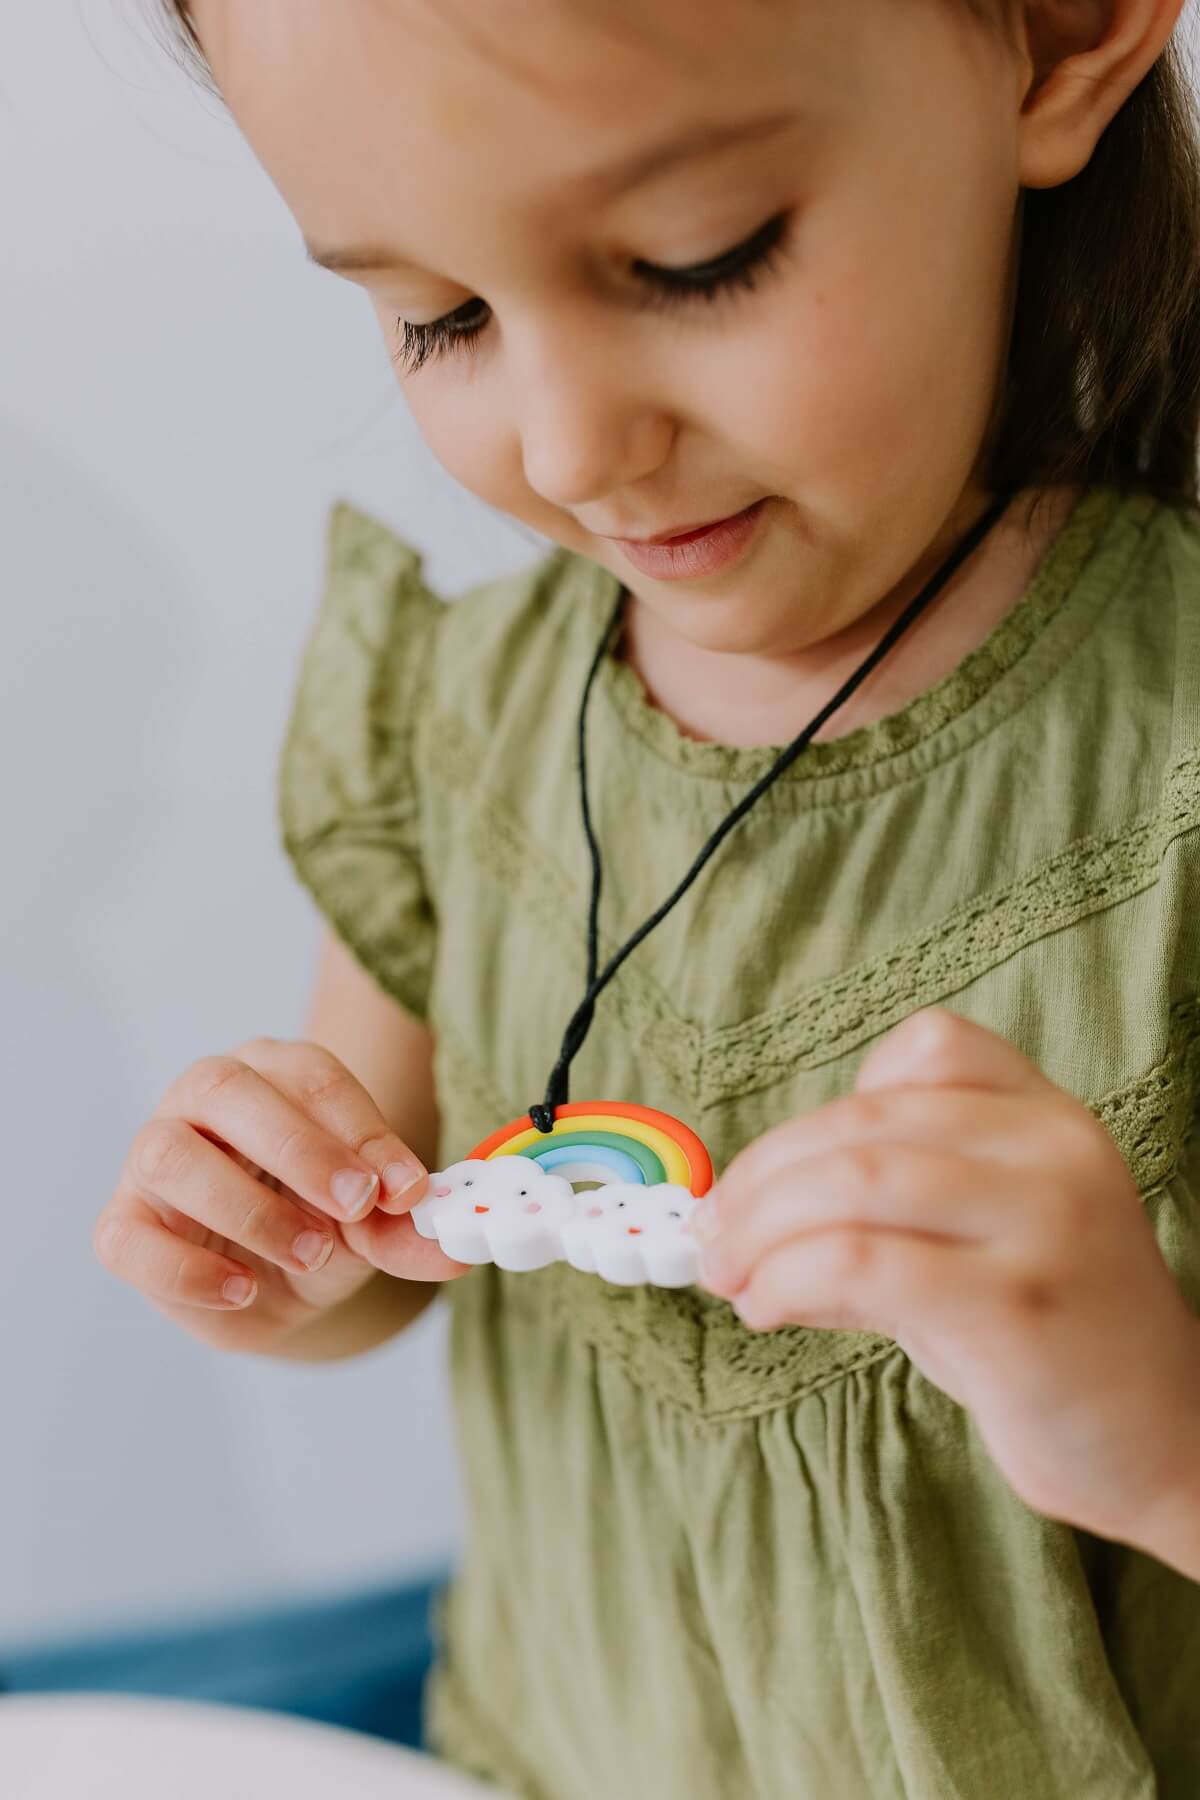 A close-up image of a child wearing a colorful silicone chew pendant necklace, designed to provide sensory stimulation and relief for teething discomfort. The pendant features a dinosaur shape with textured surfaces, and the child is happily chewing on it.